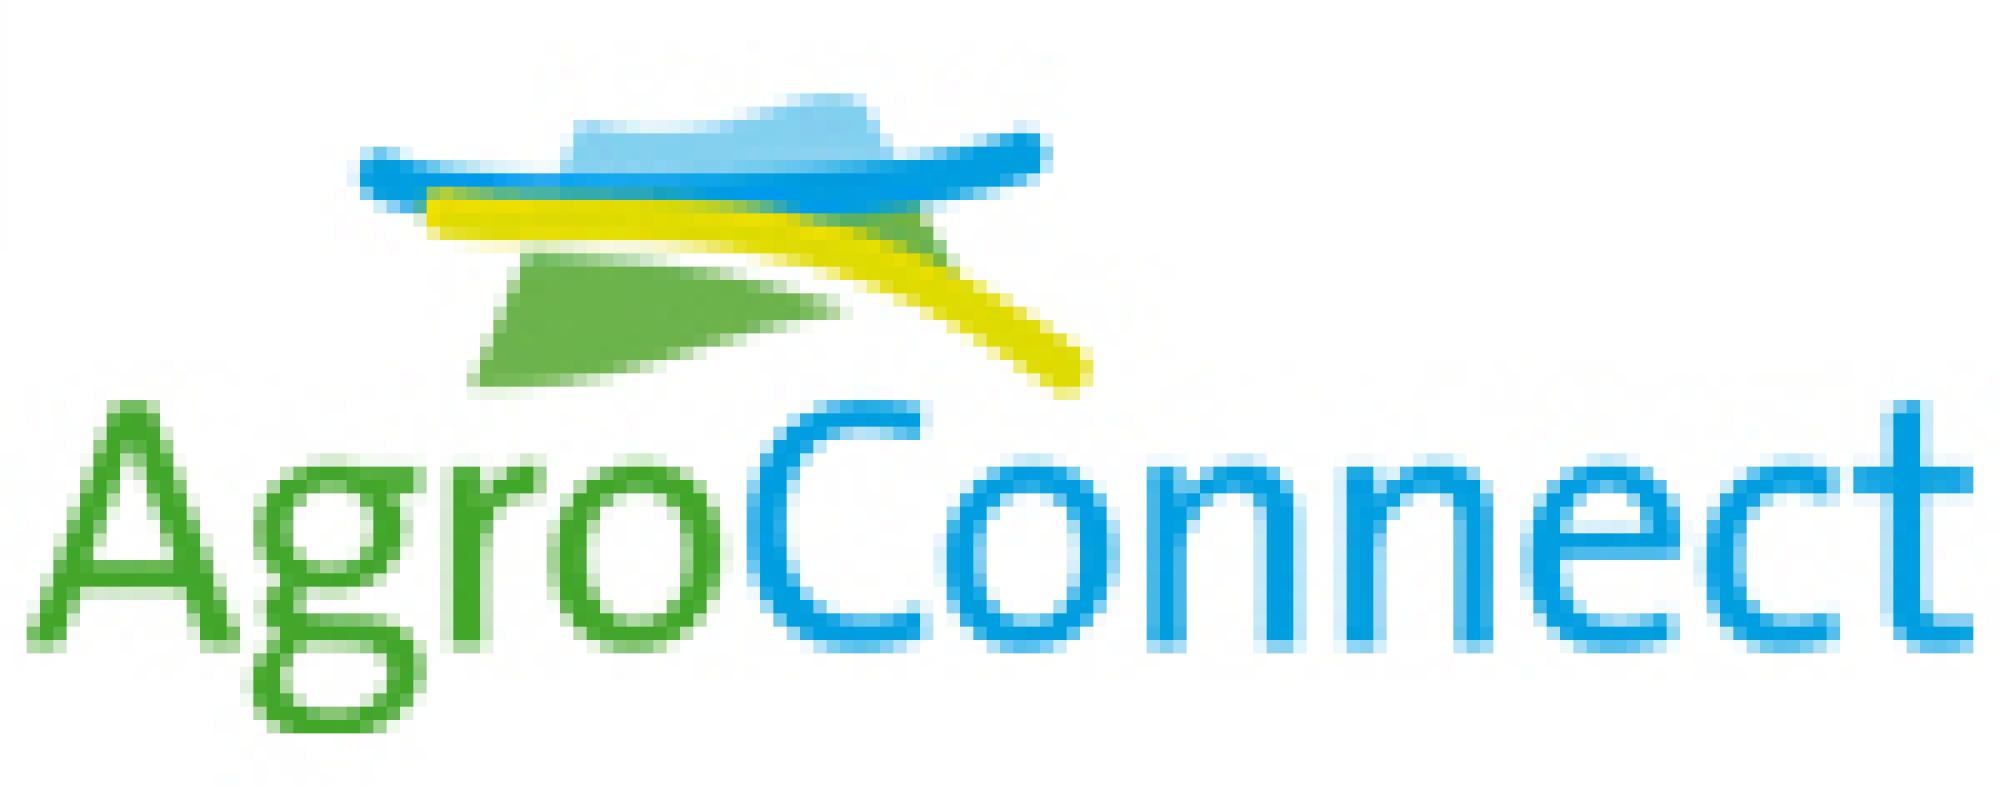 Fancom participates in new AgroConnect data standard